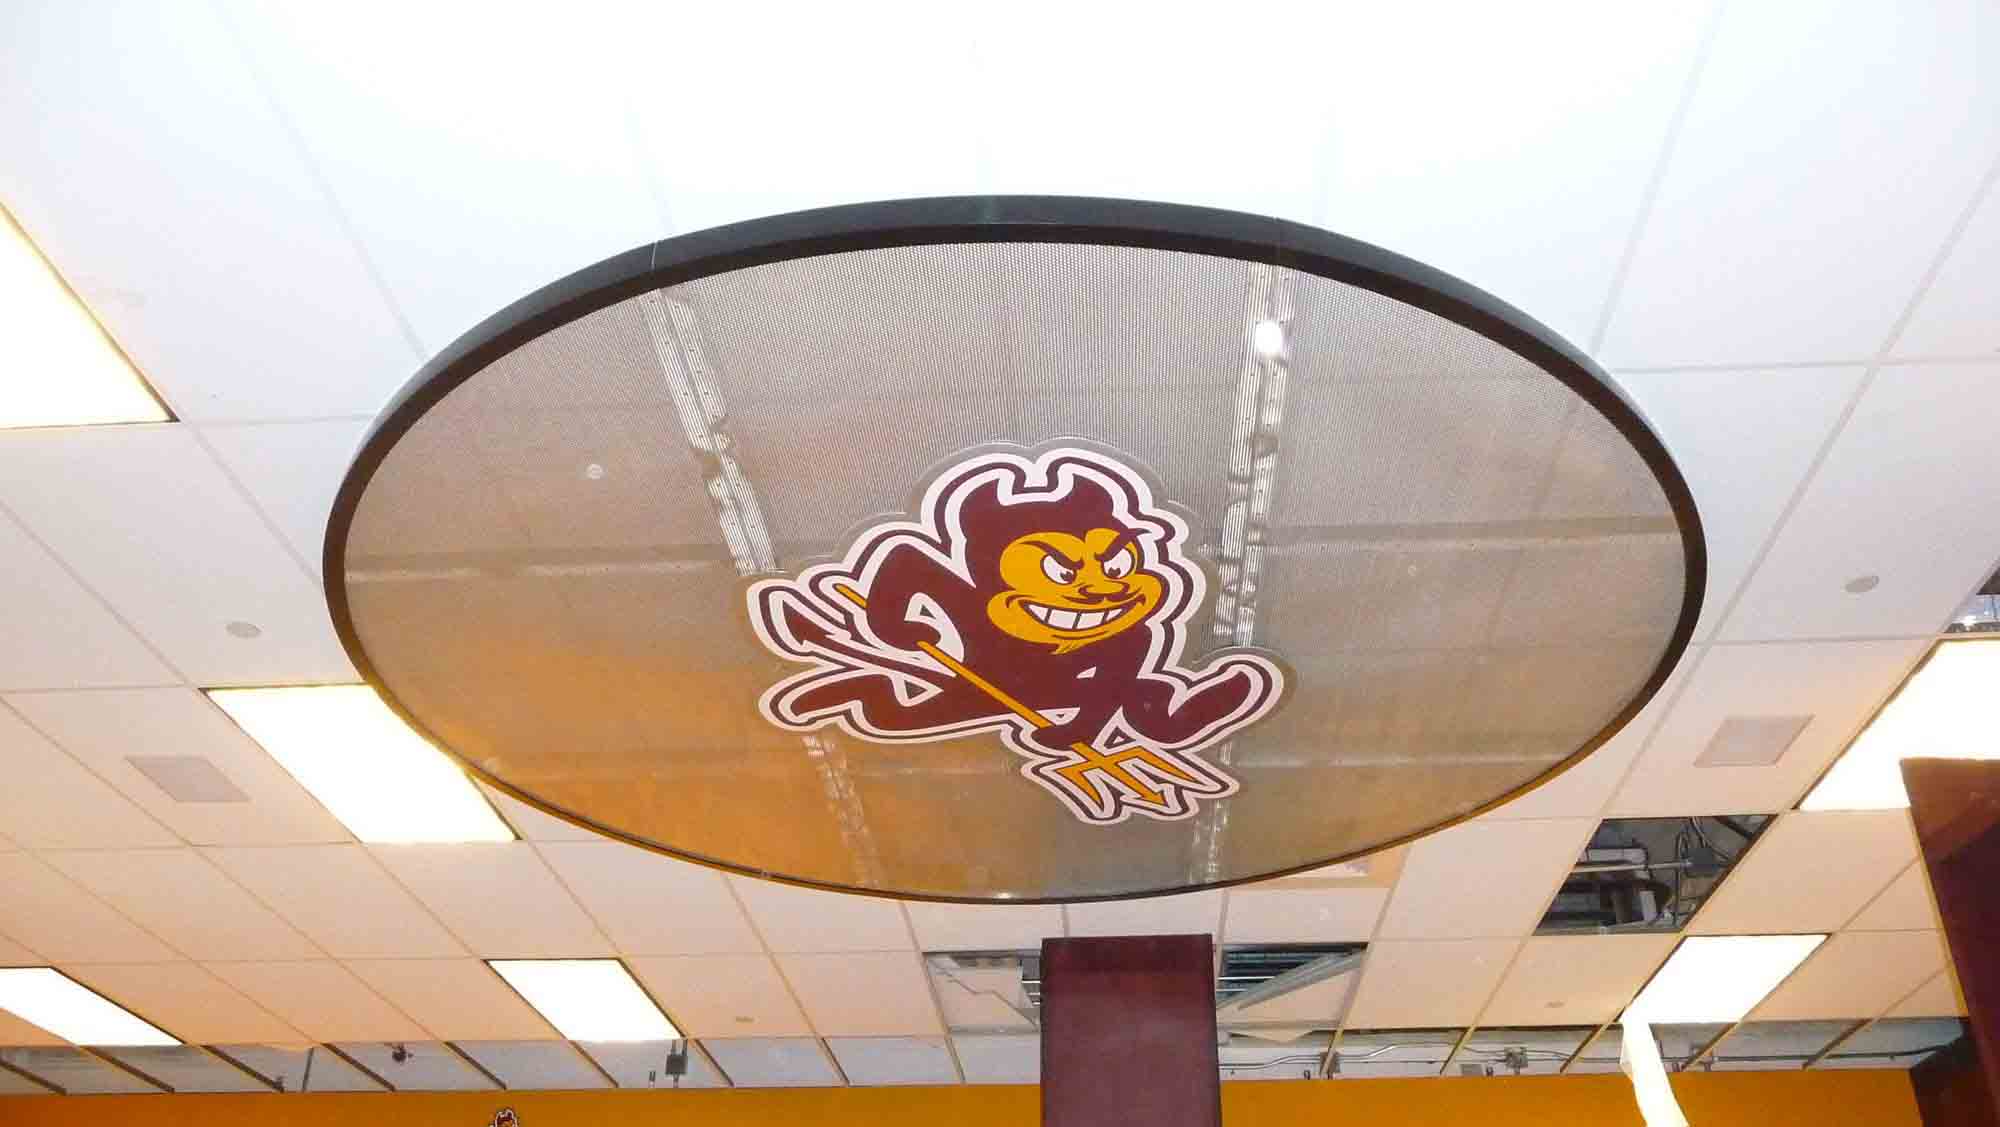 The ceiling inside the locker room at Arizona State University, focused on an ASU-themed circular disk, made out of Aluminum Perforated Metal.